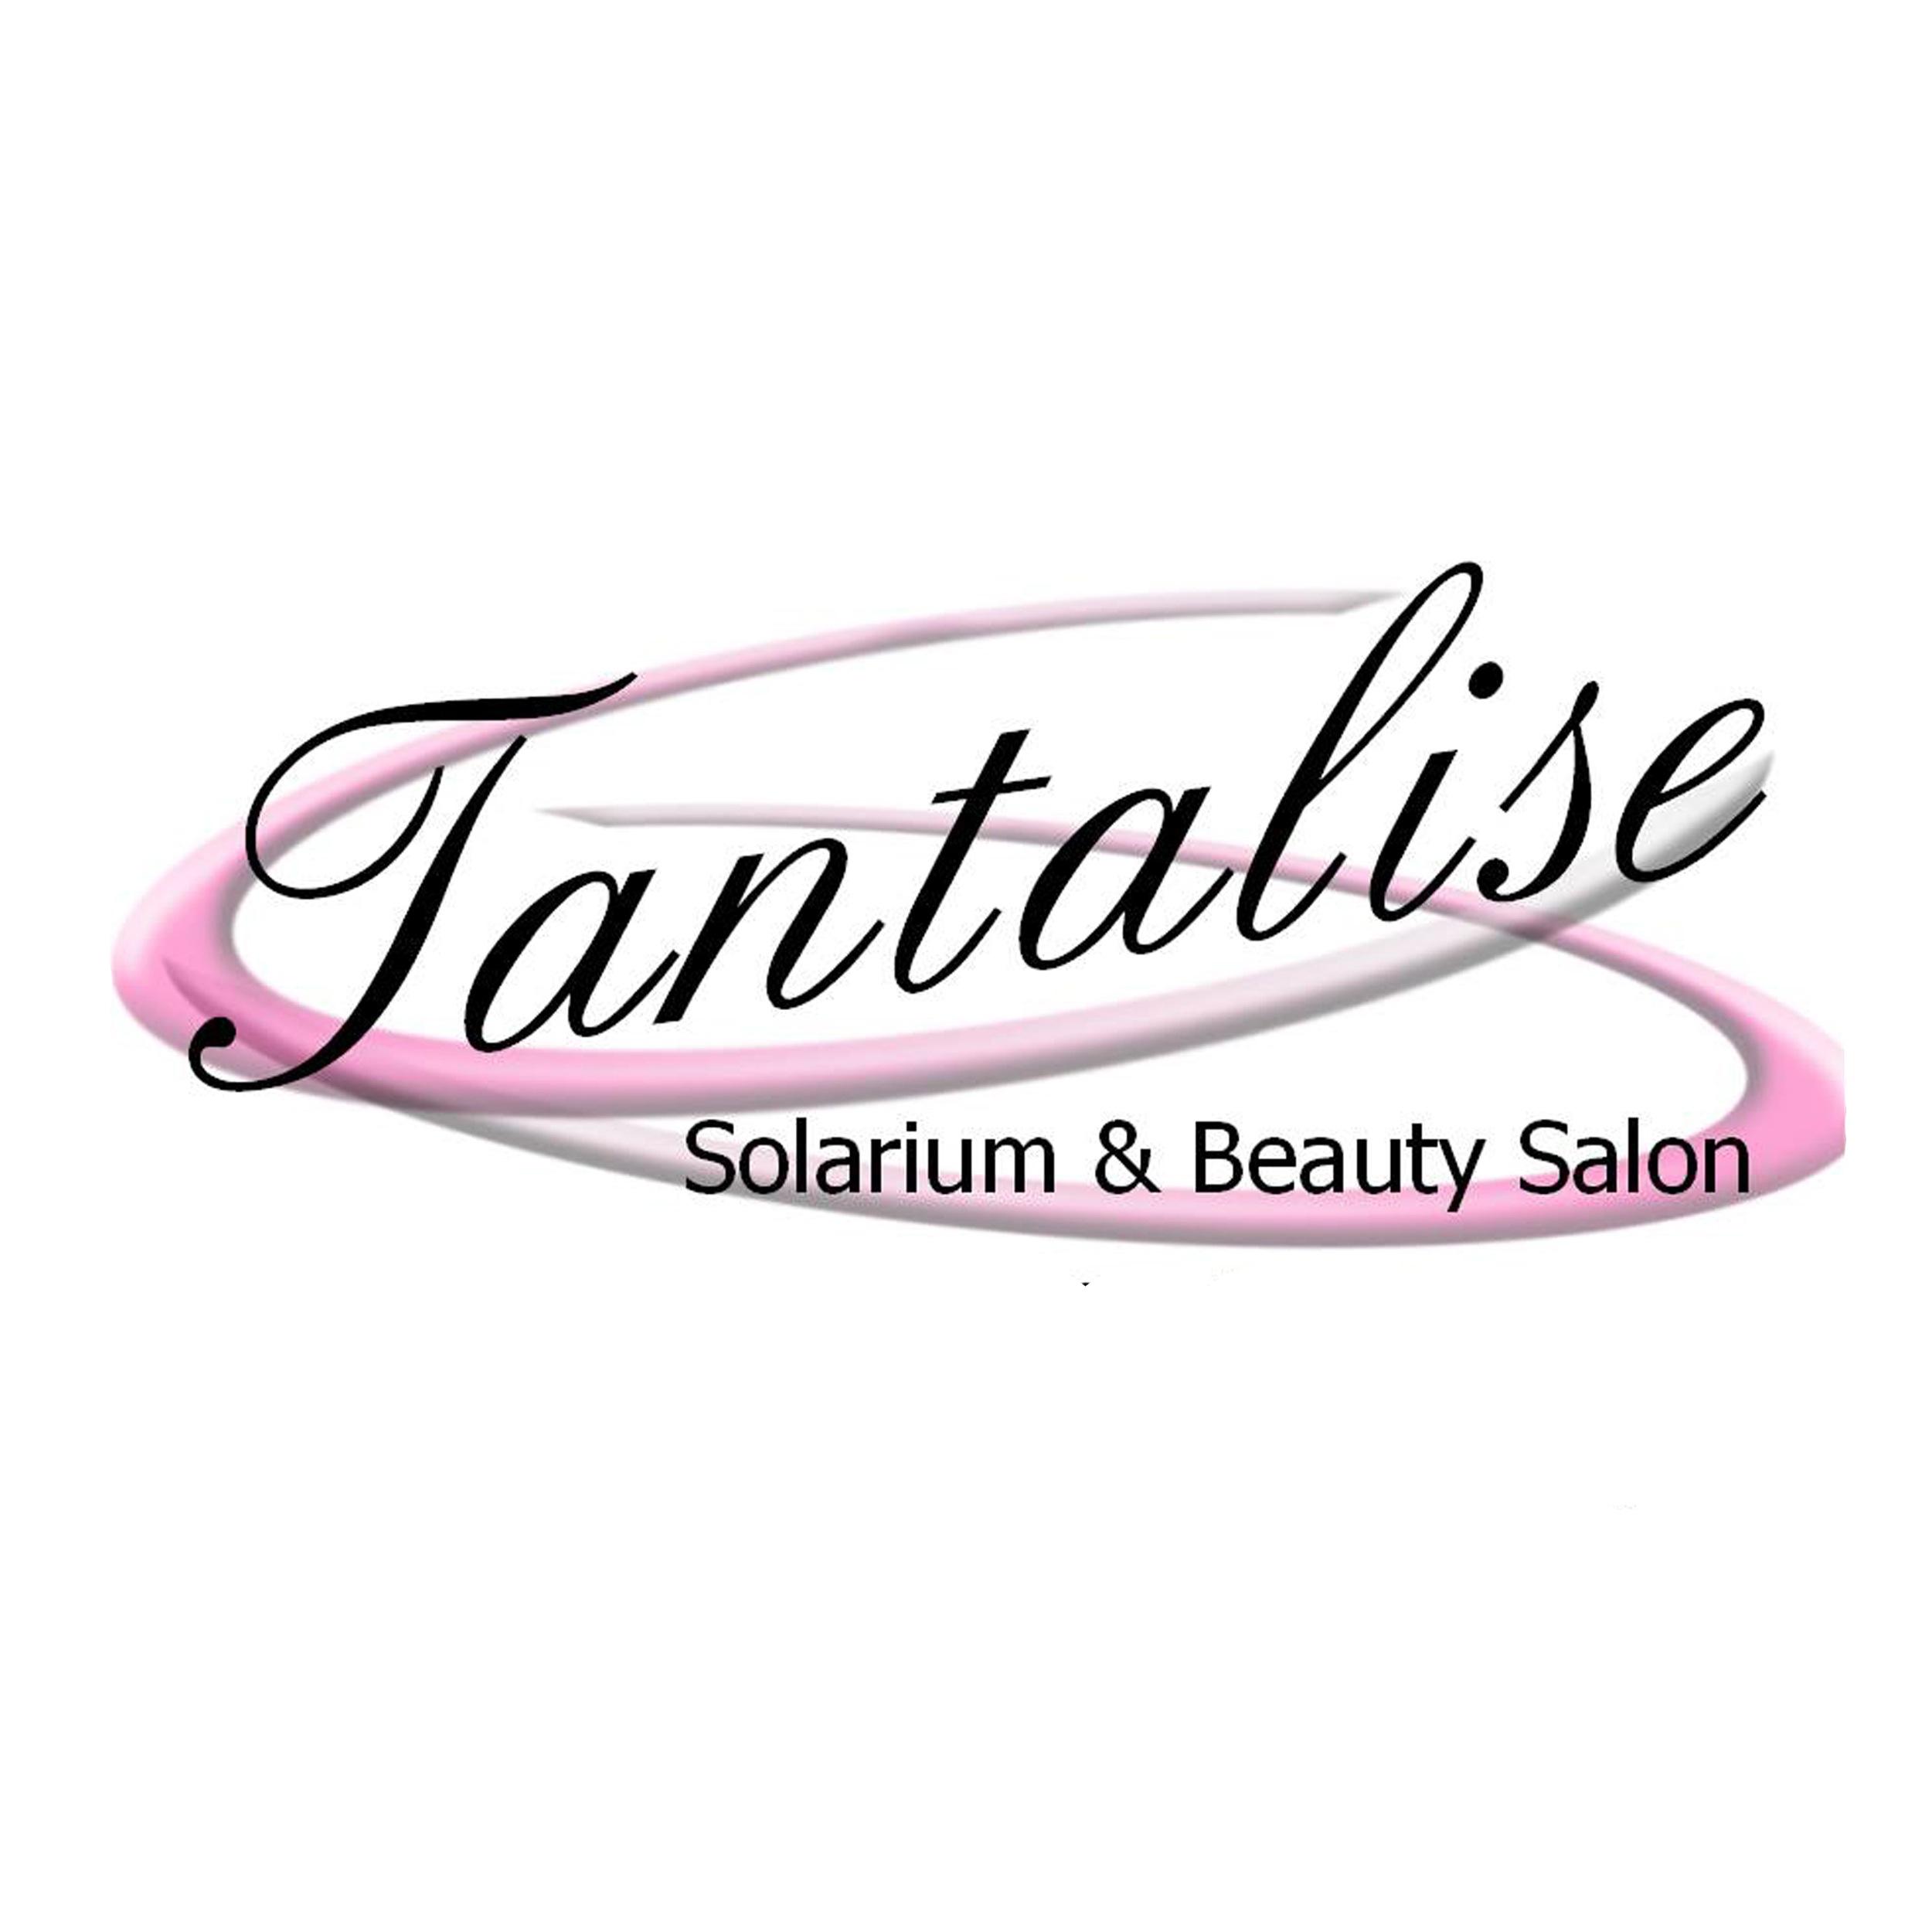 Whether you wish to have a well deserved pampering, build a gorgeous tan, or simply treat yourself or special someone, Tantalise offers everything you need!